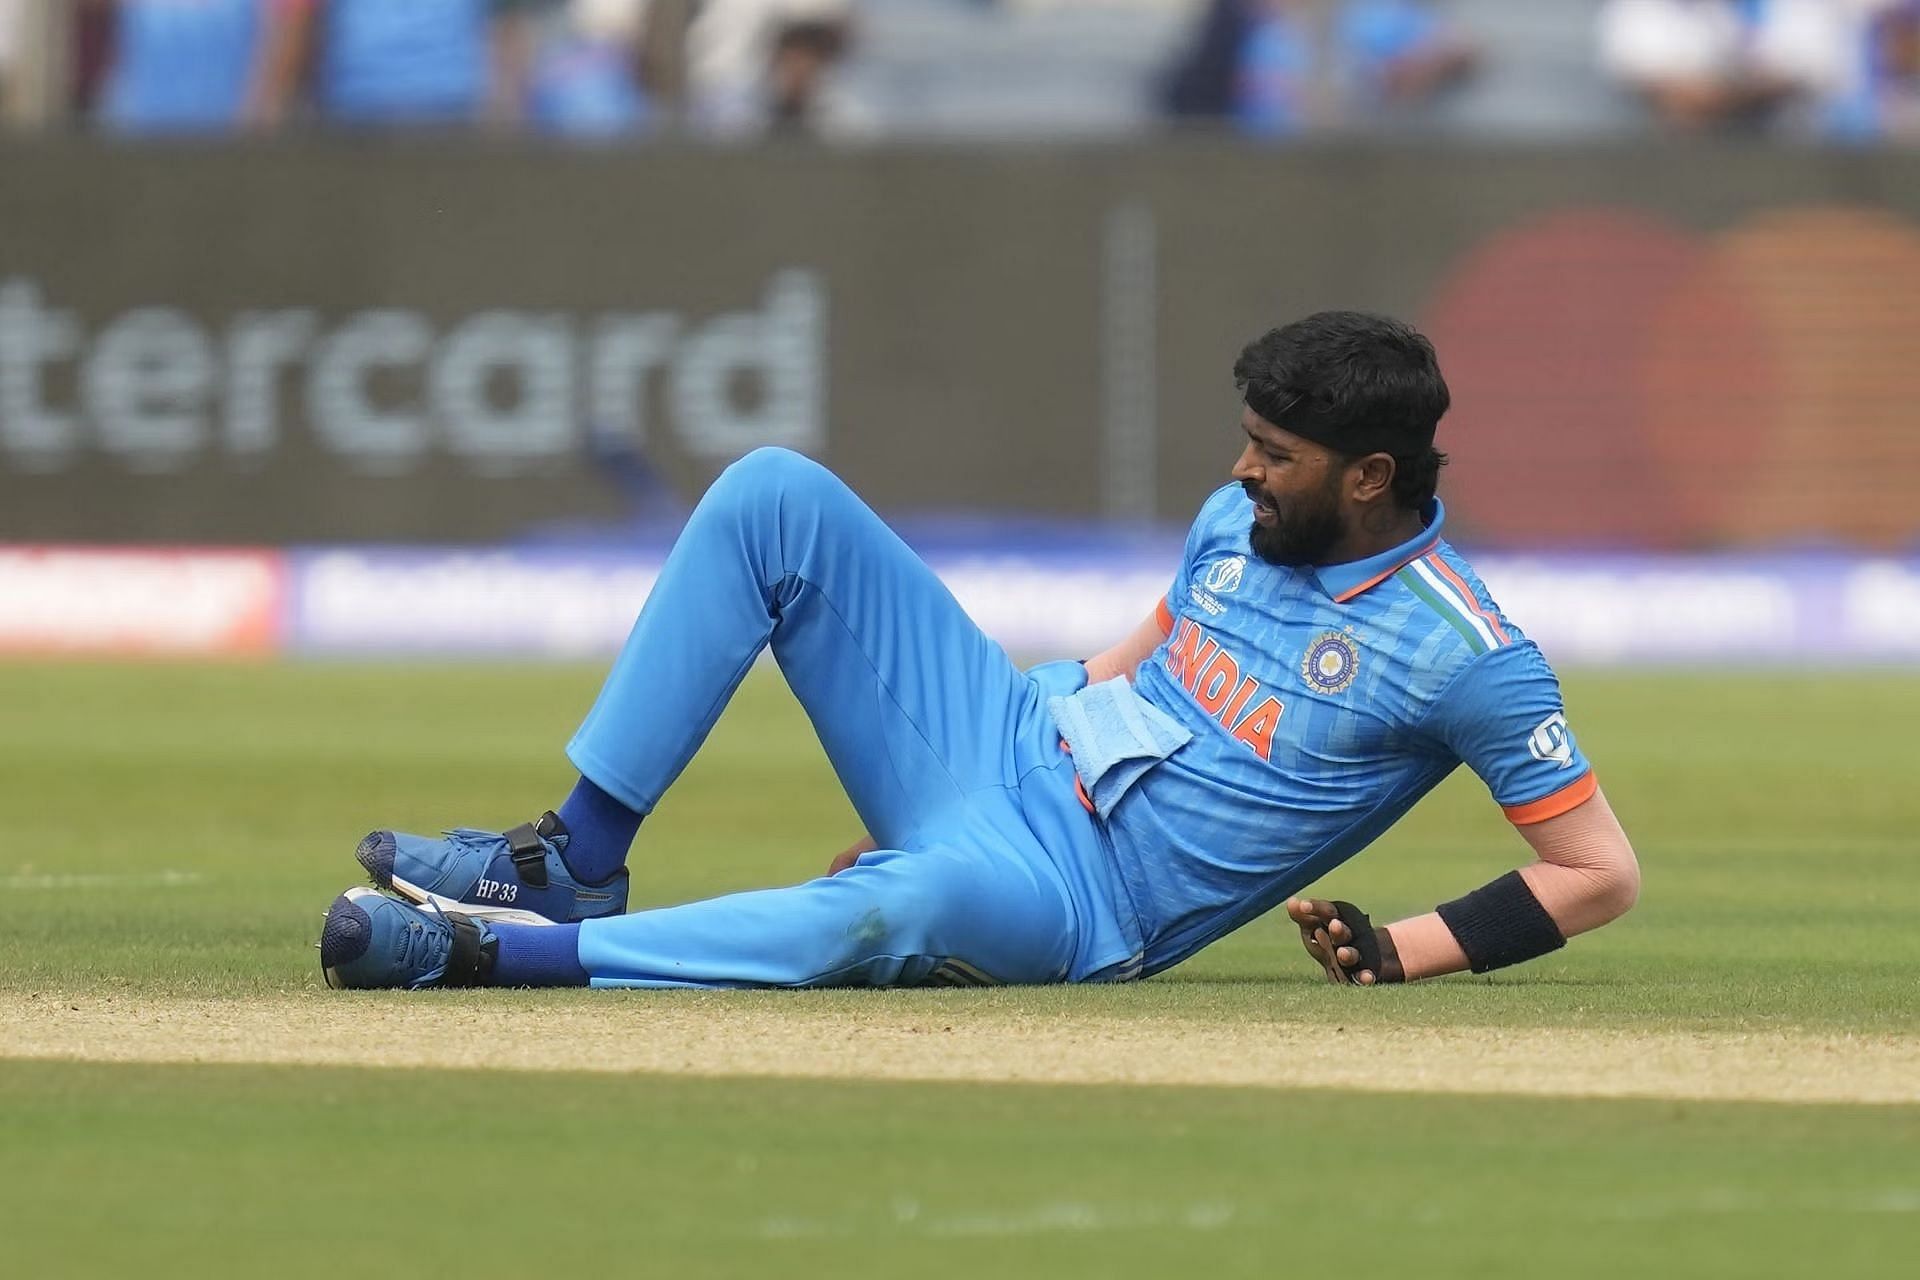 Hardik Pandya was ruled out of the ongoing World Cup due to an ankle injury. [P/C: AP]